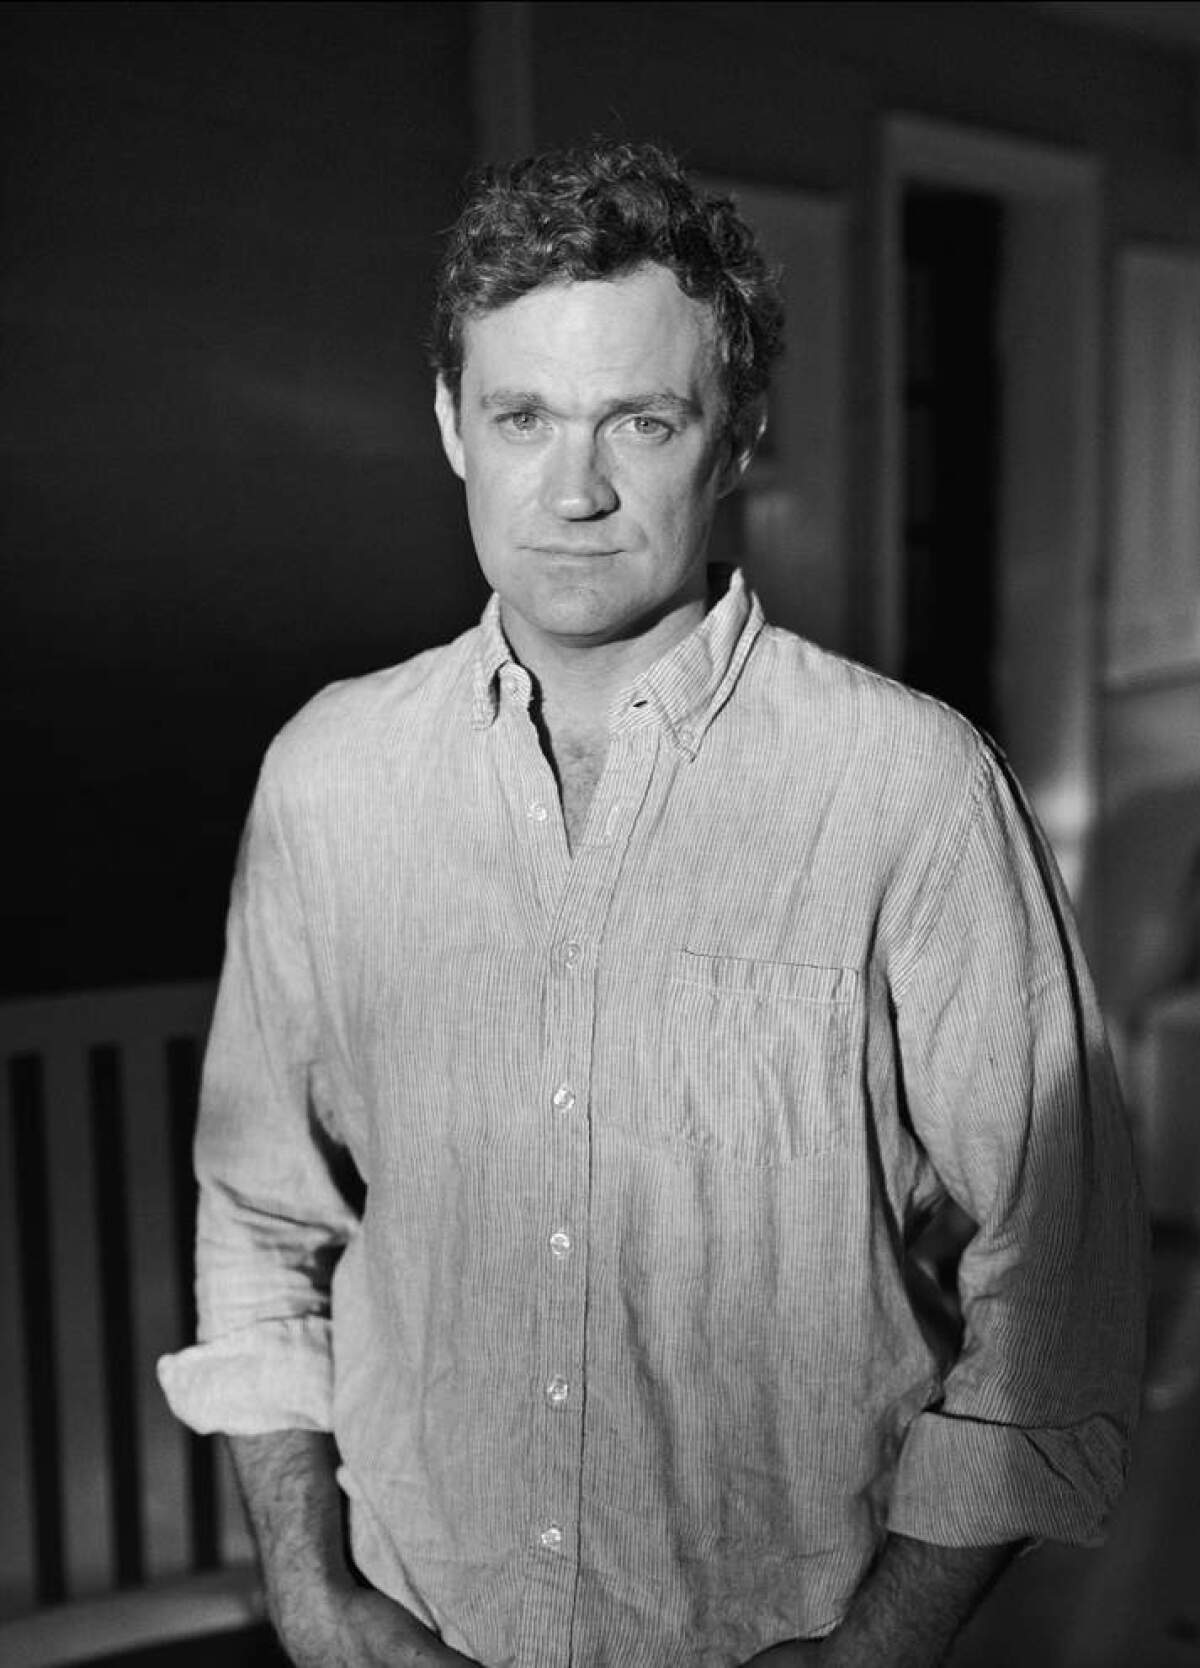 Patrick Radden Keefe, in a casual shirt, looks into the camera